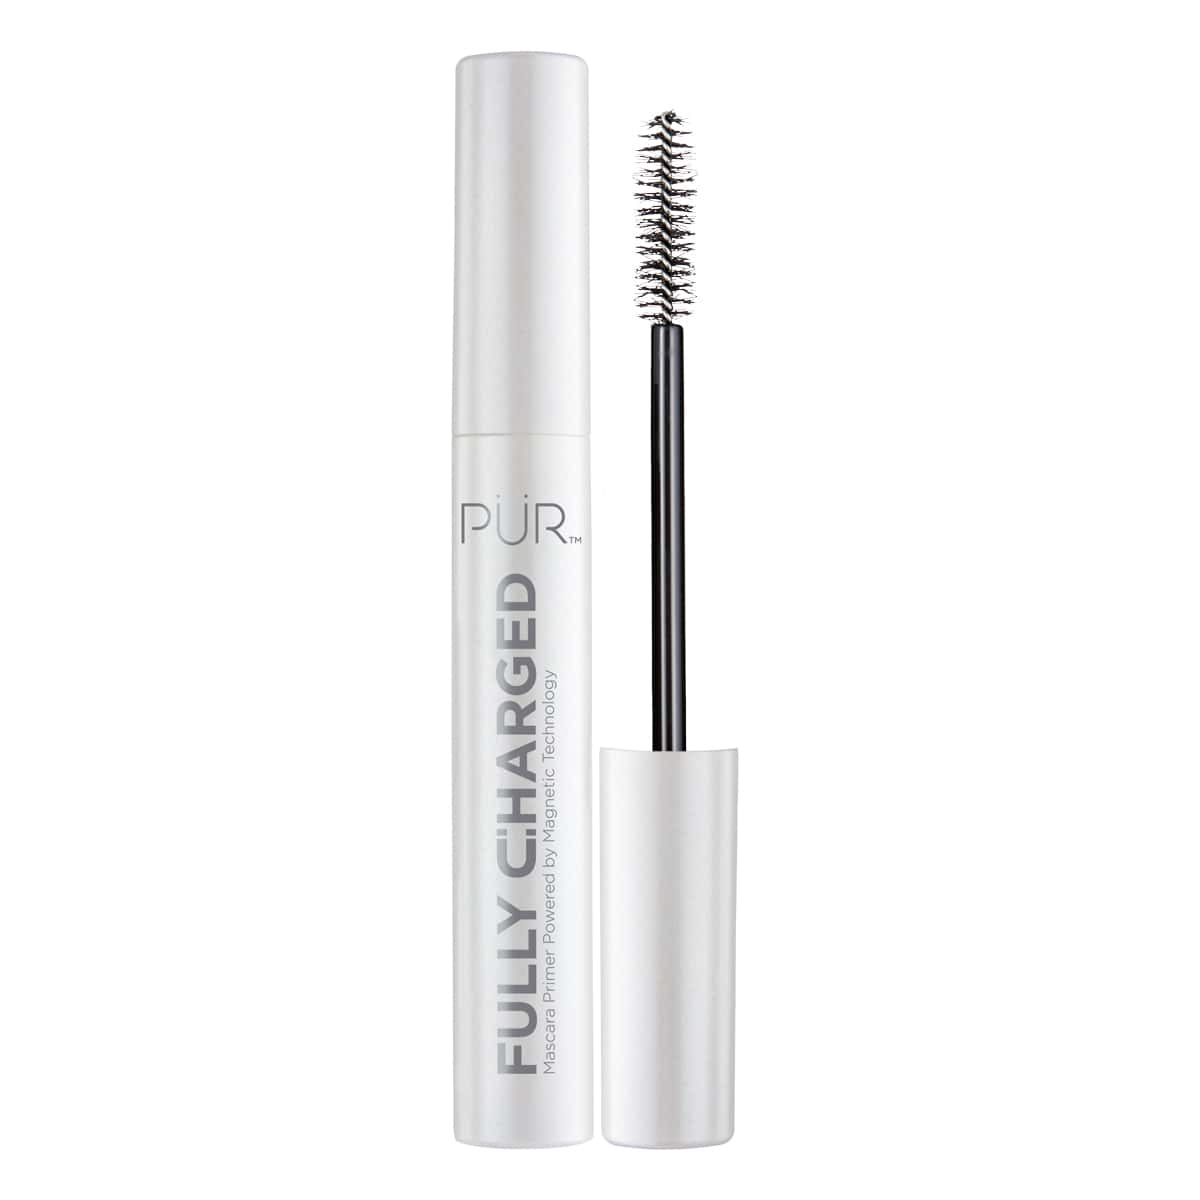 Fully Charged Mascara Primer Powered by Magnetic Technology